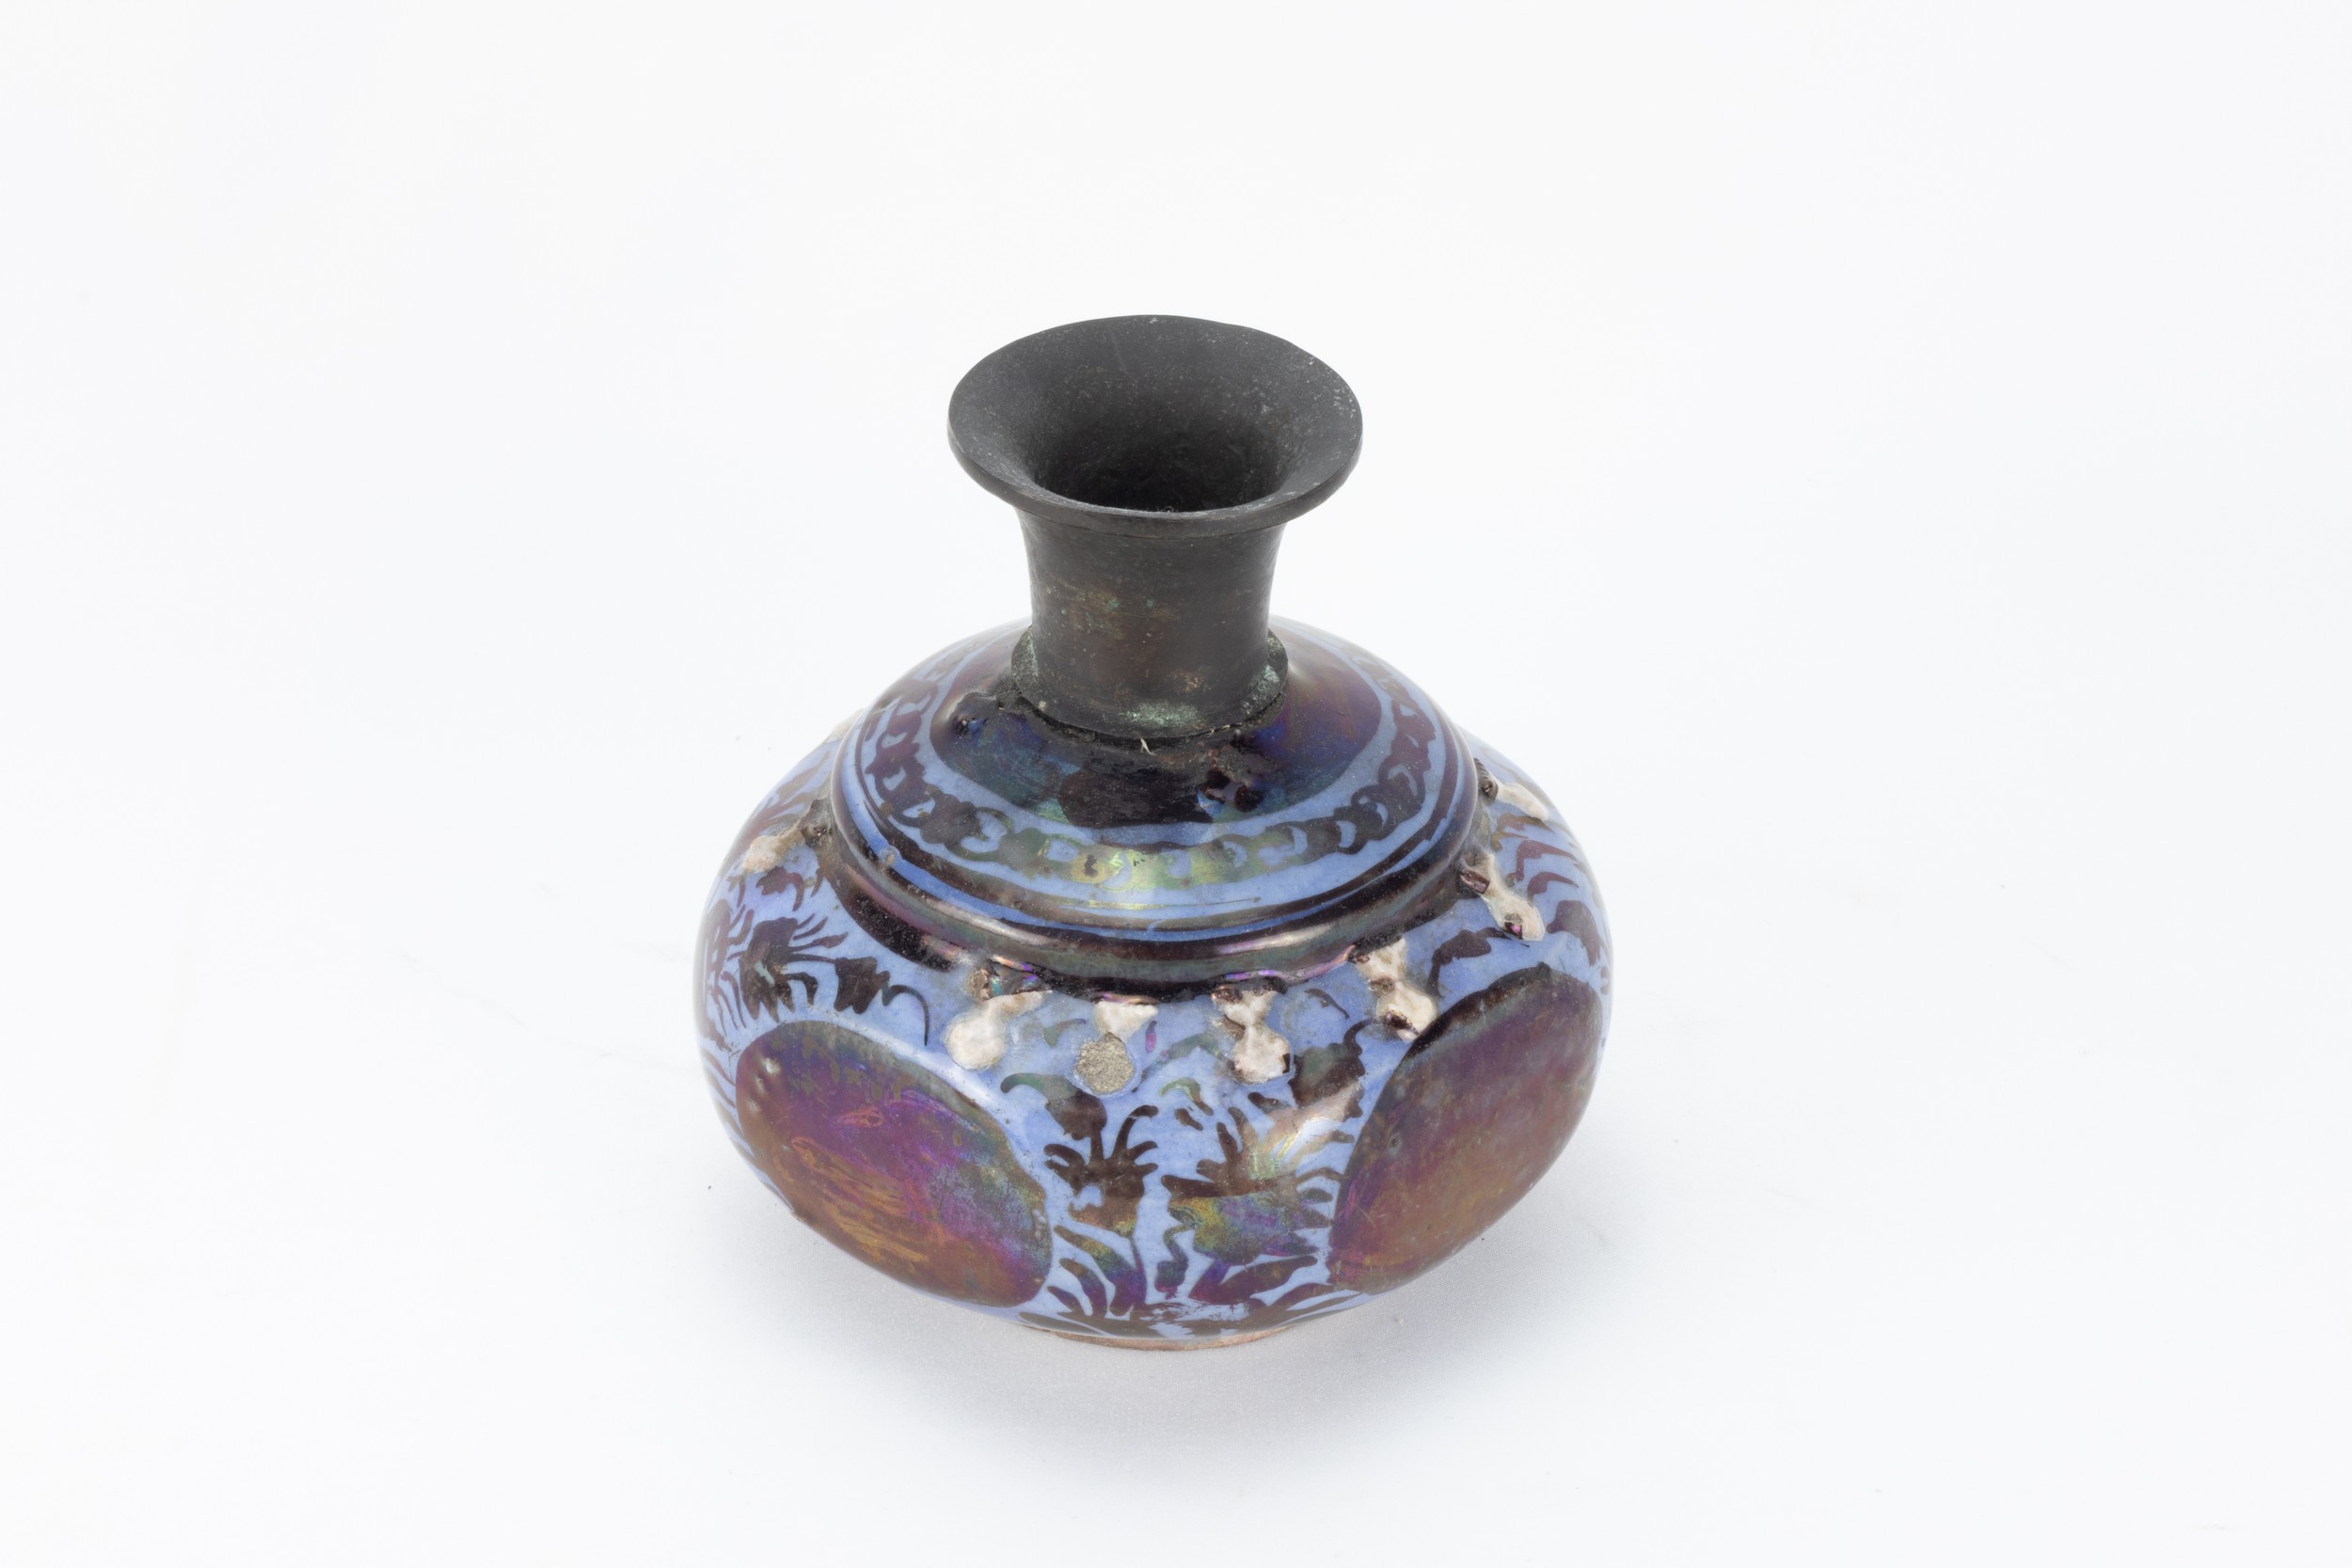 An Islamic Safavid Painted Bottle from the 17th Century.

H: Approximately 14cm 